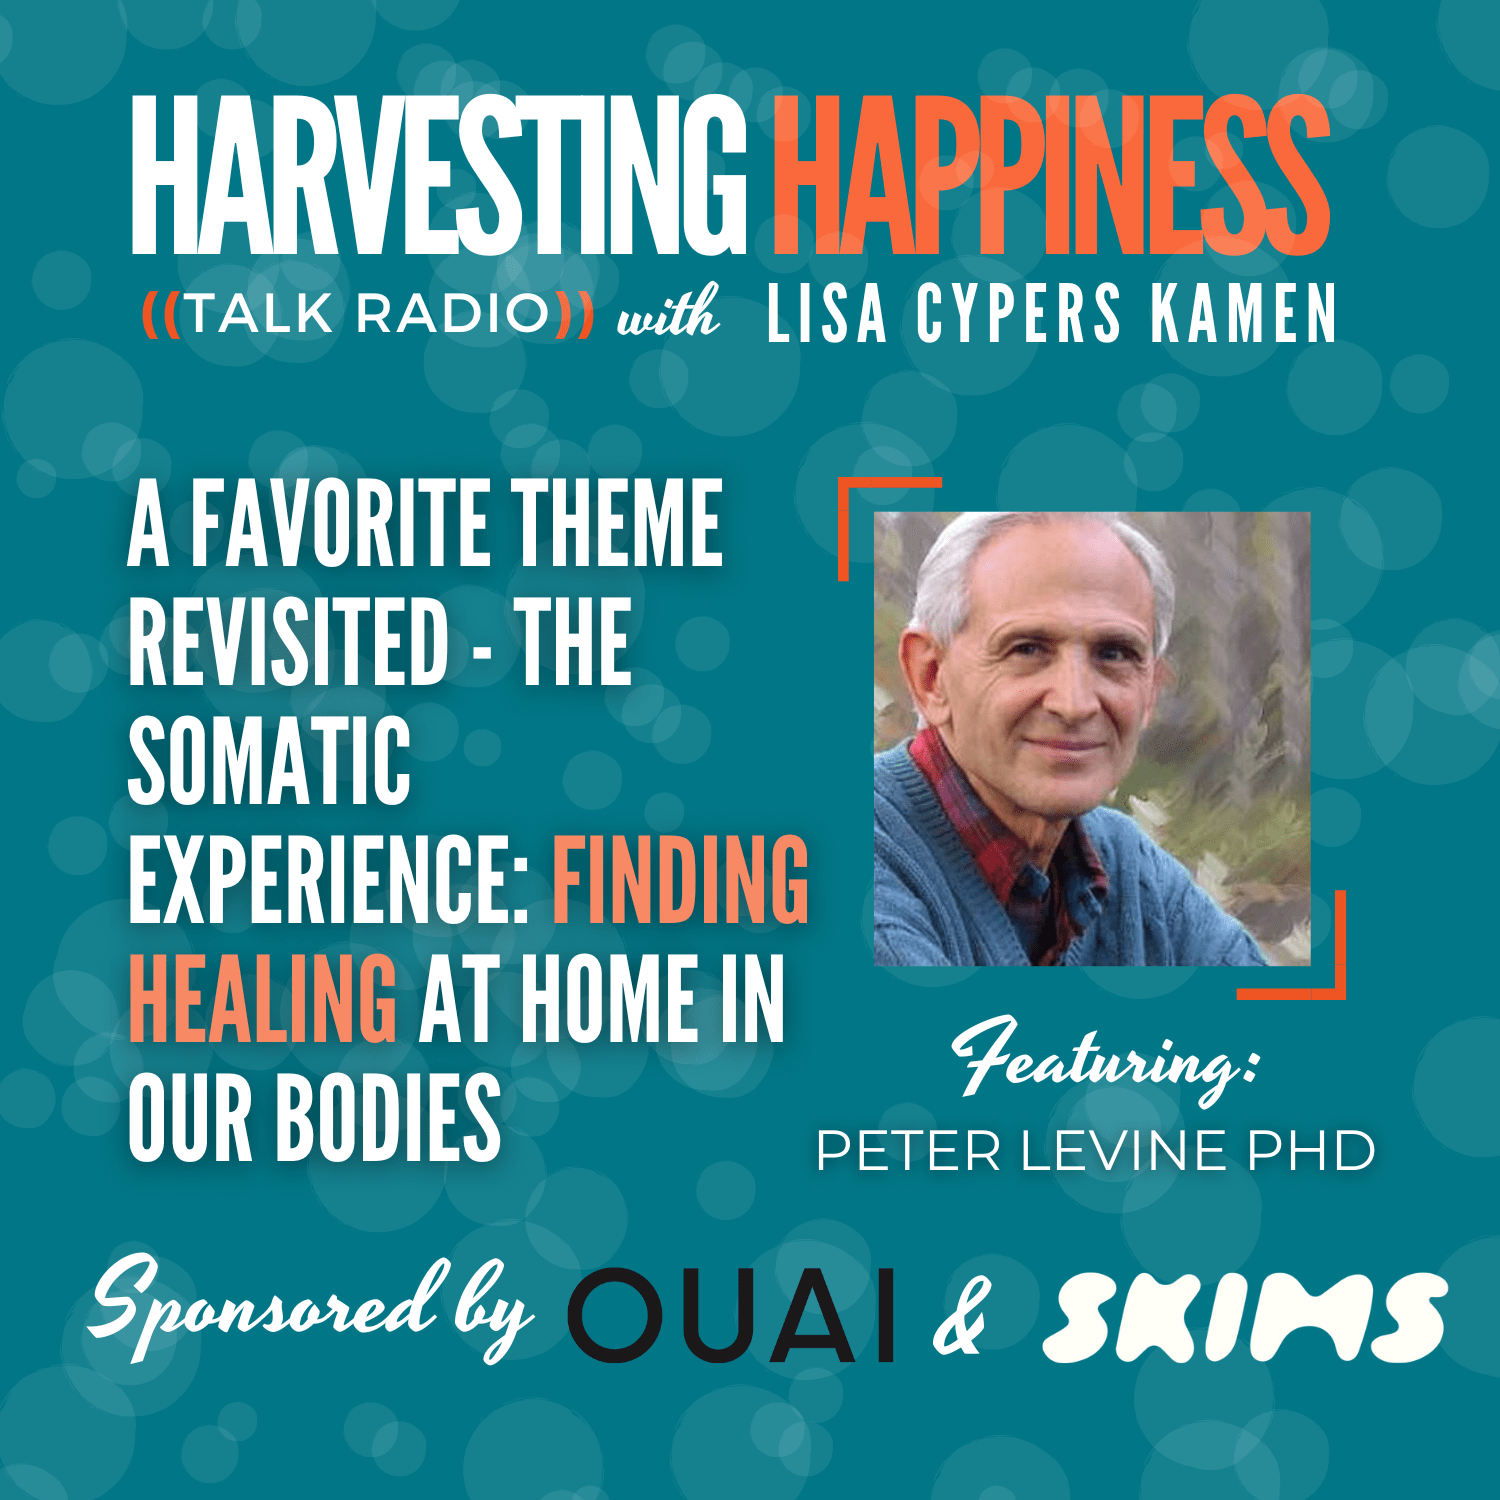 The Somatic Experience: Finding Healing at Home in Our Bodies